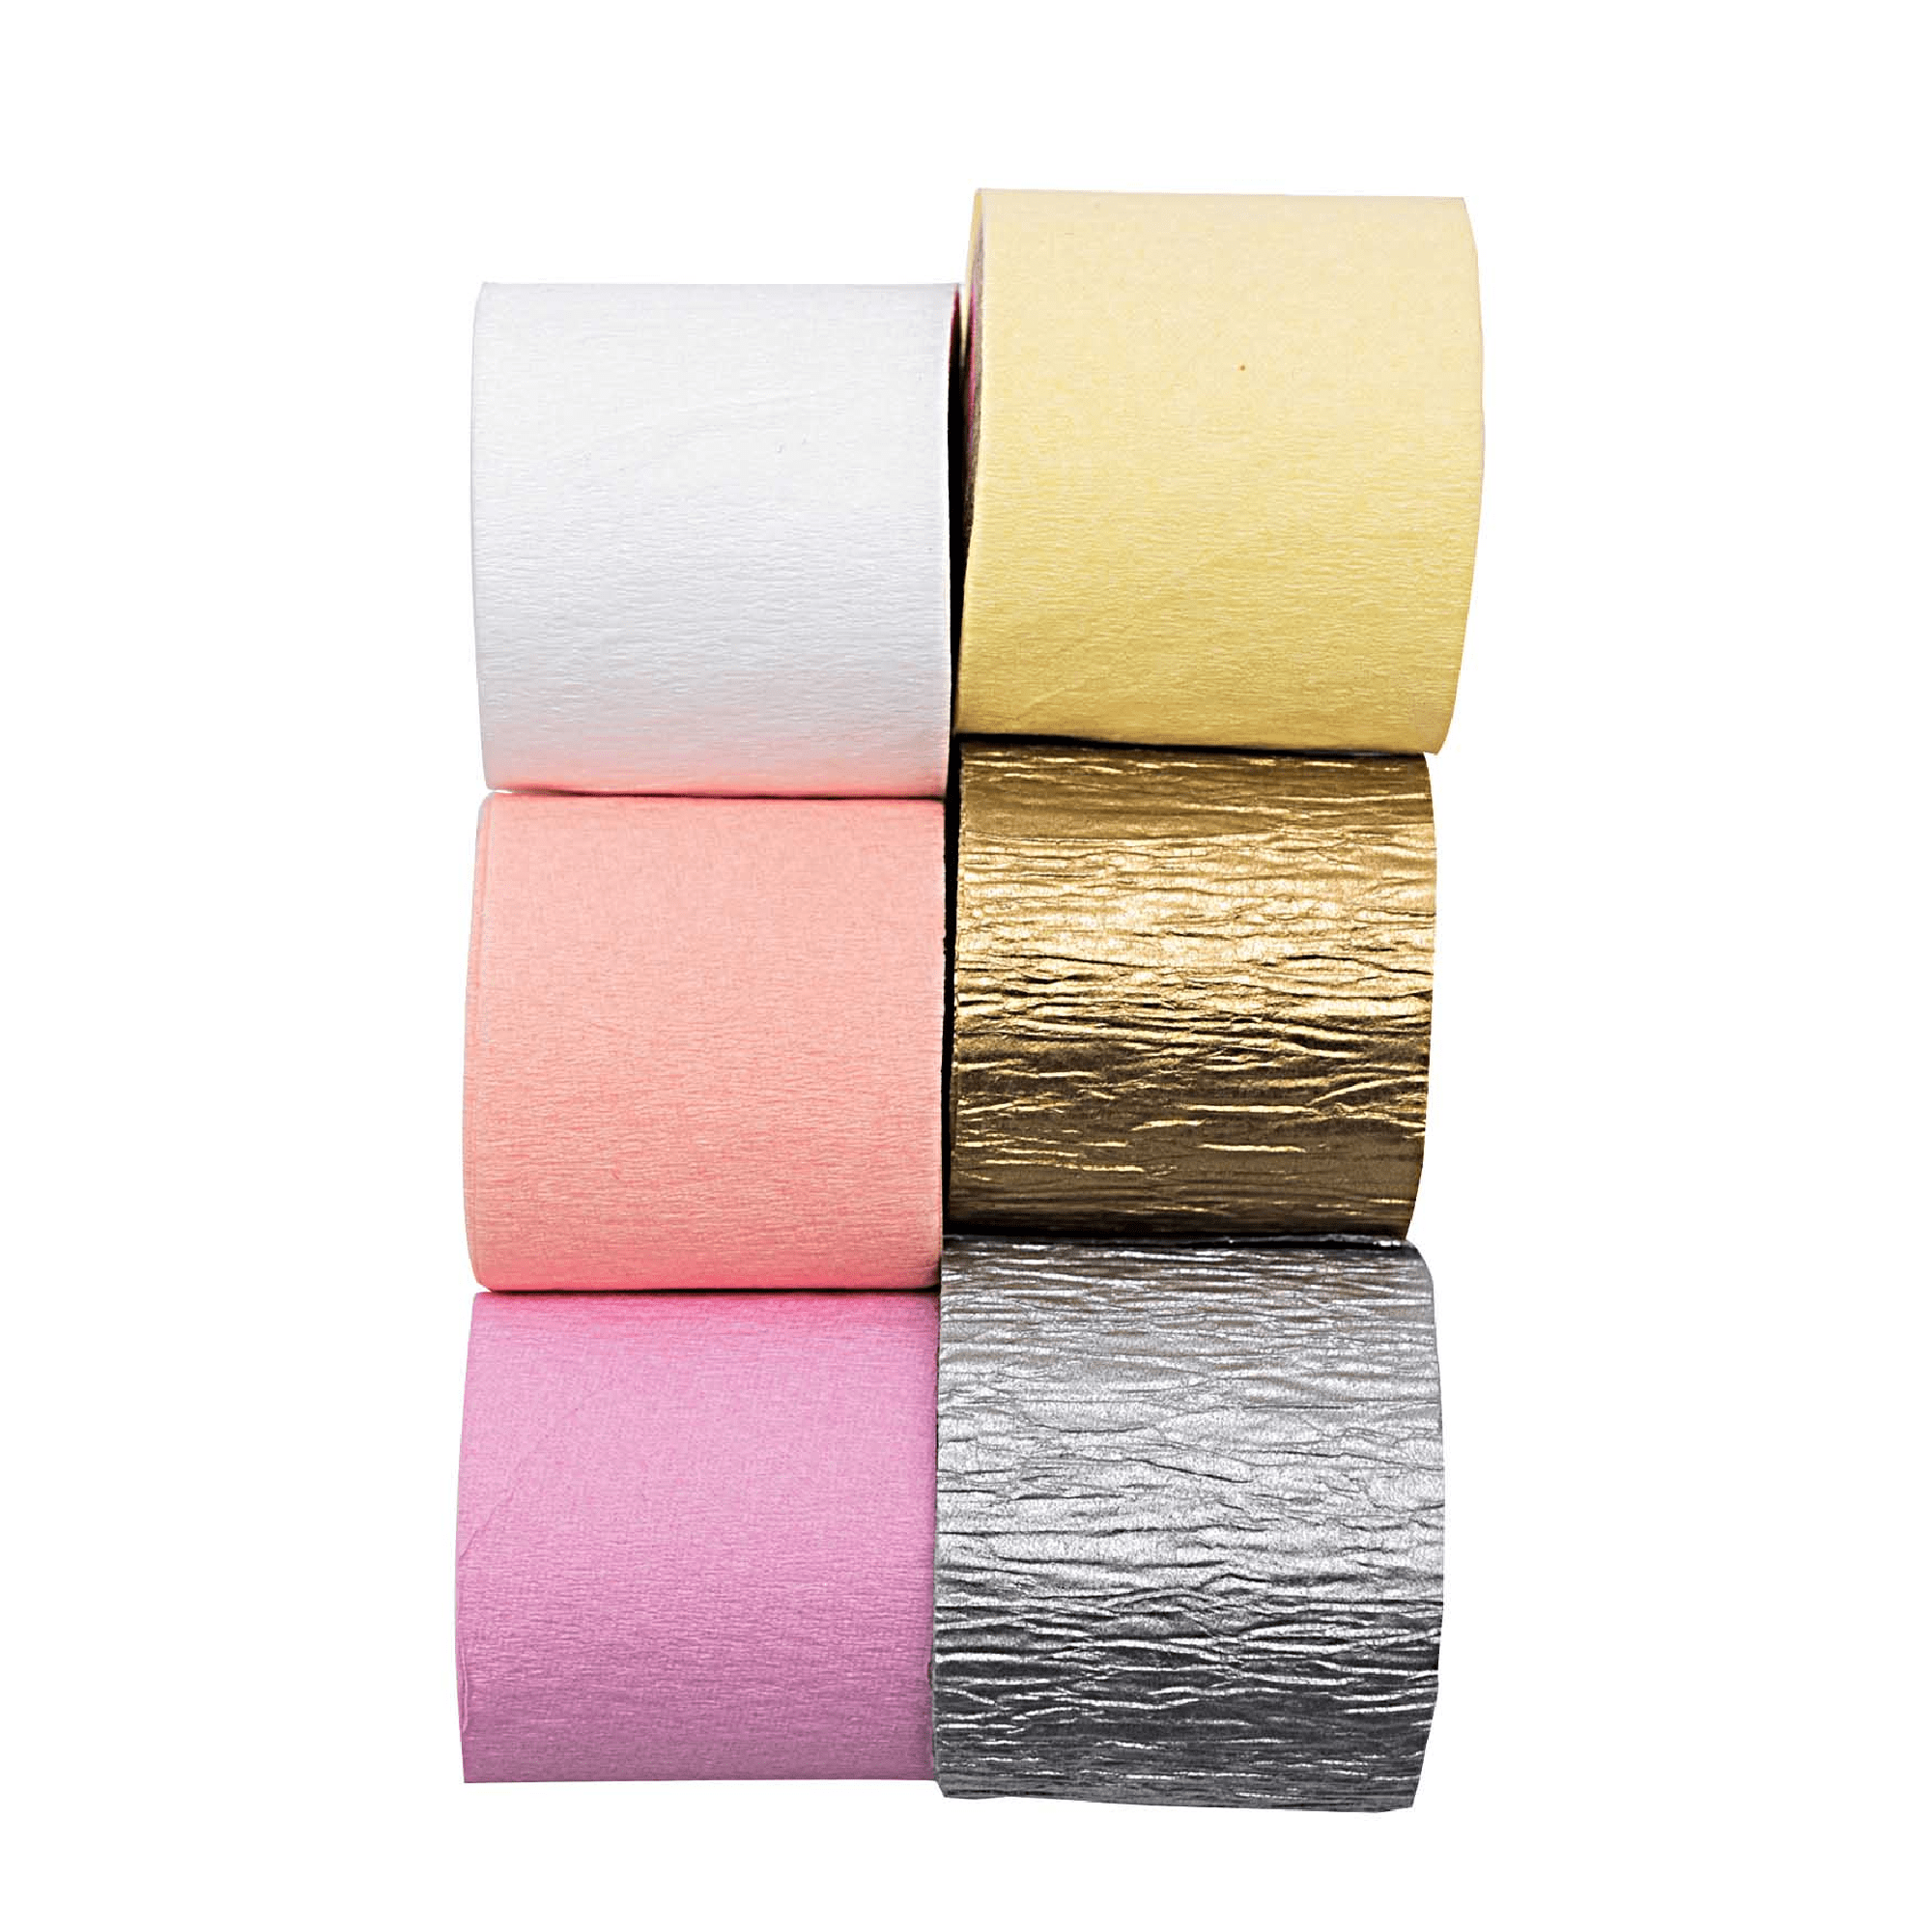 Pretty in Pink Crepe Paper Streamers Set